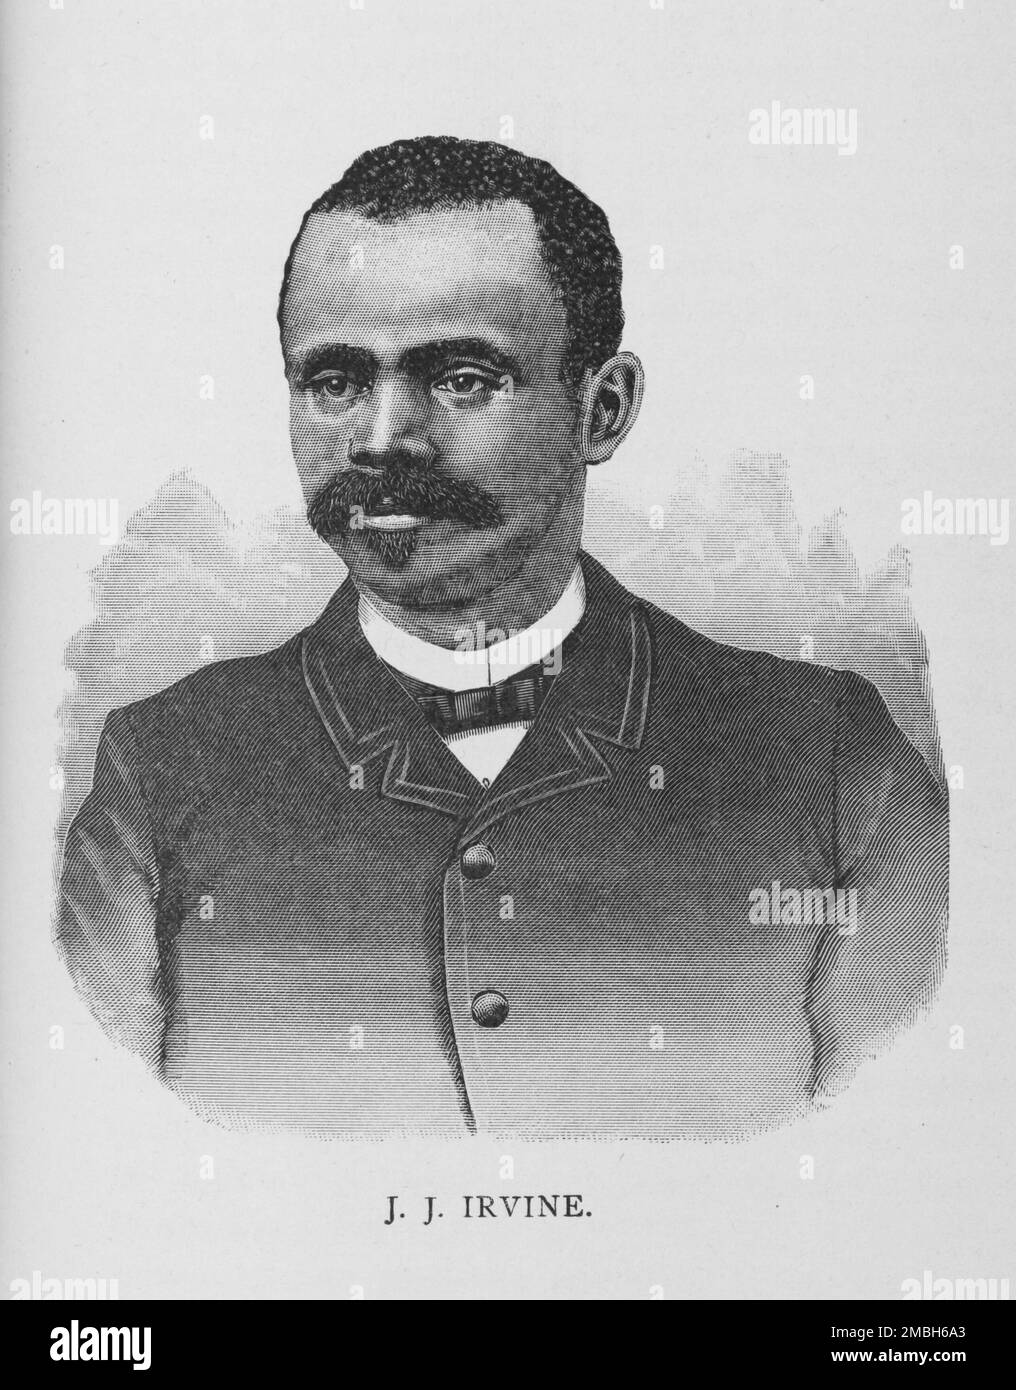 J. J. Irvine, 1887. Engineer, farmer and politician John J. Irvine was a noted leader of a movement to establish an African-American colony in the Western United States. From &quot;Men of Mark: Eminent, Progressive and Rising&quot; by William J. Simmons. Stock Photo